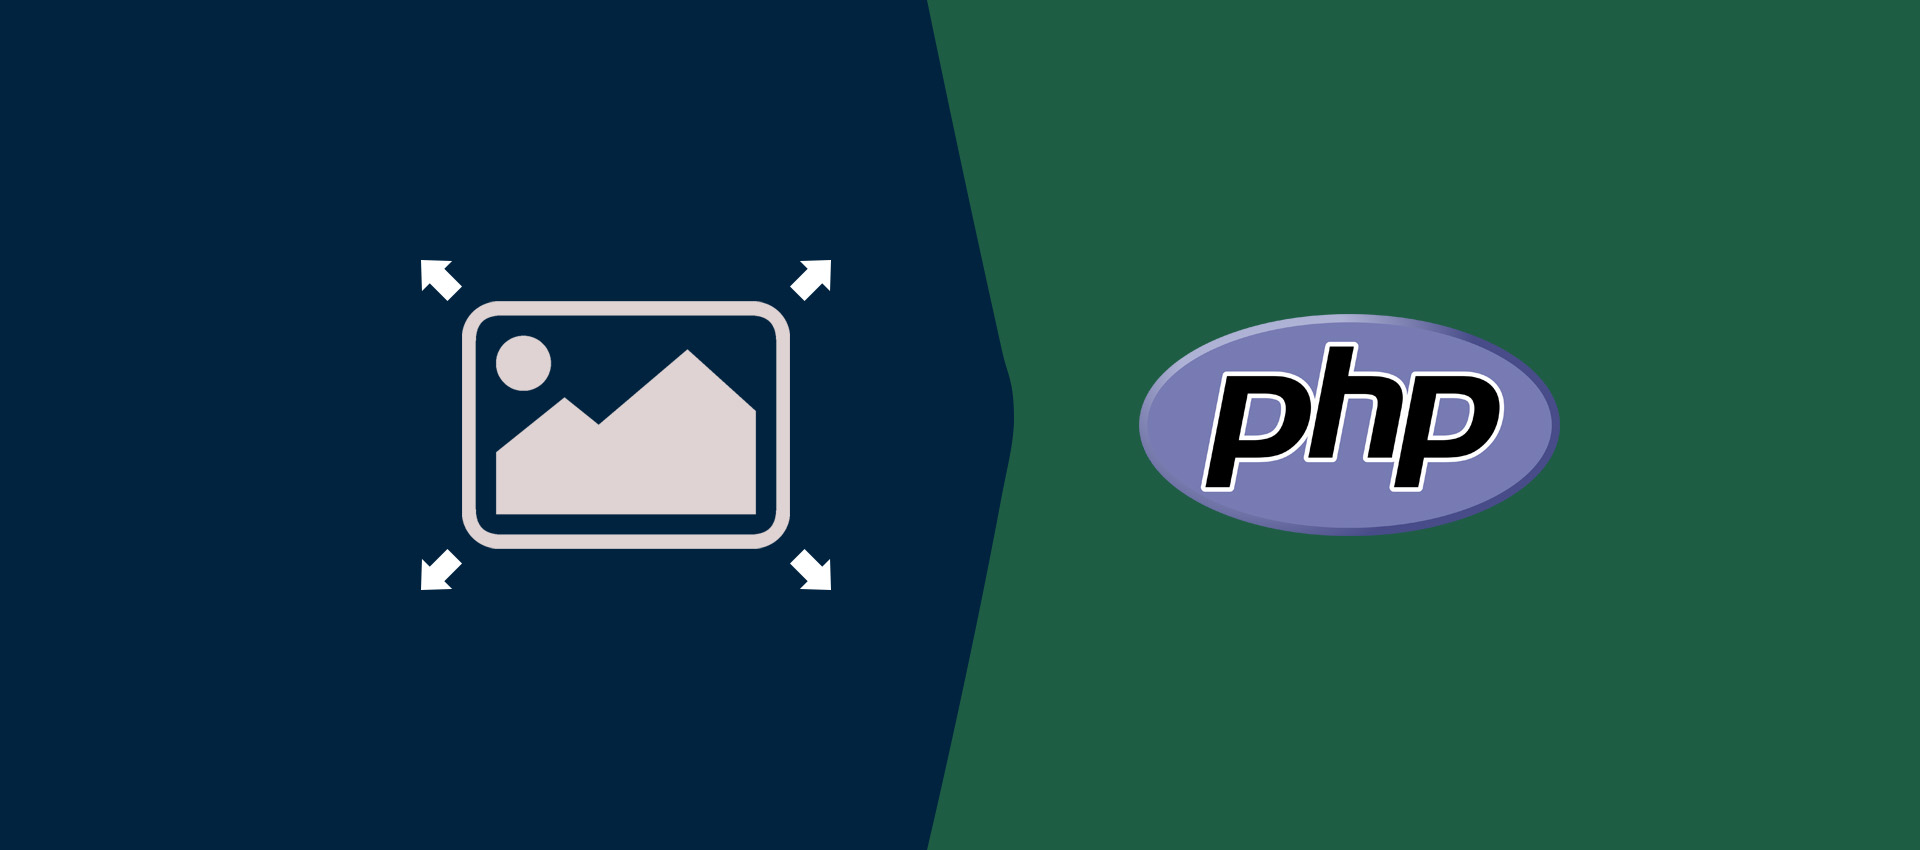 How To Resize Image In PHP